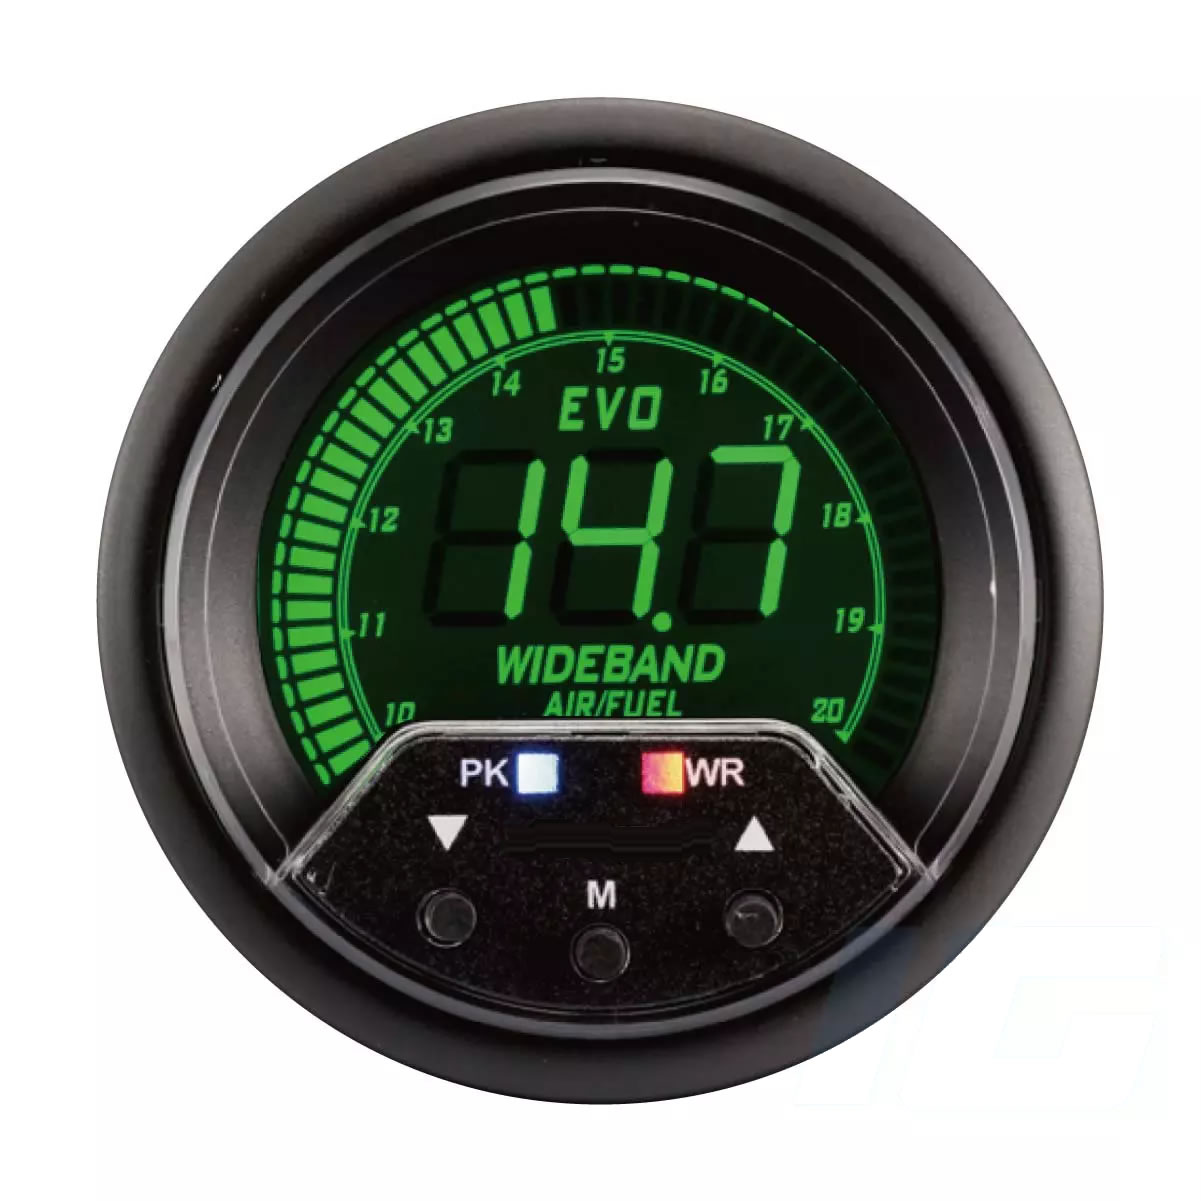 60mm LCD Performance Car Gauges - Wideband Air or Fuel Gauge With Sensor and Warning and Peak For Your Sport Racing Car